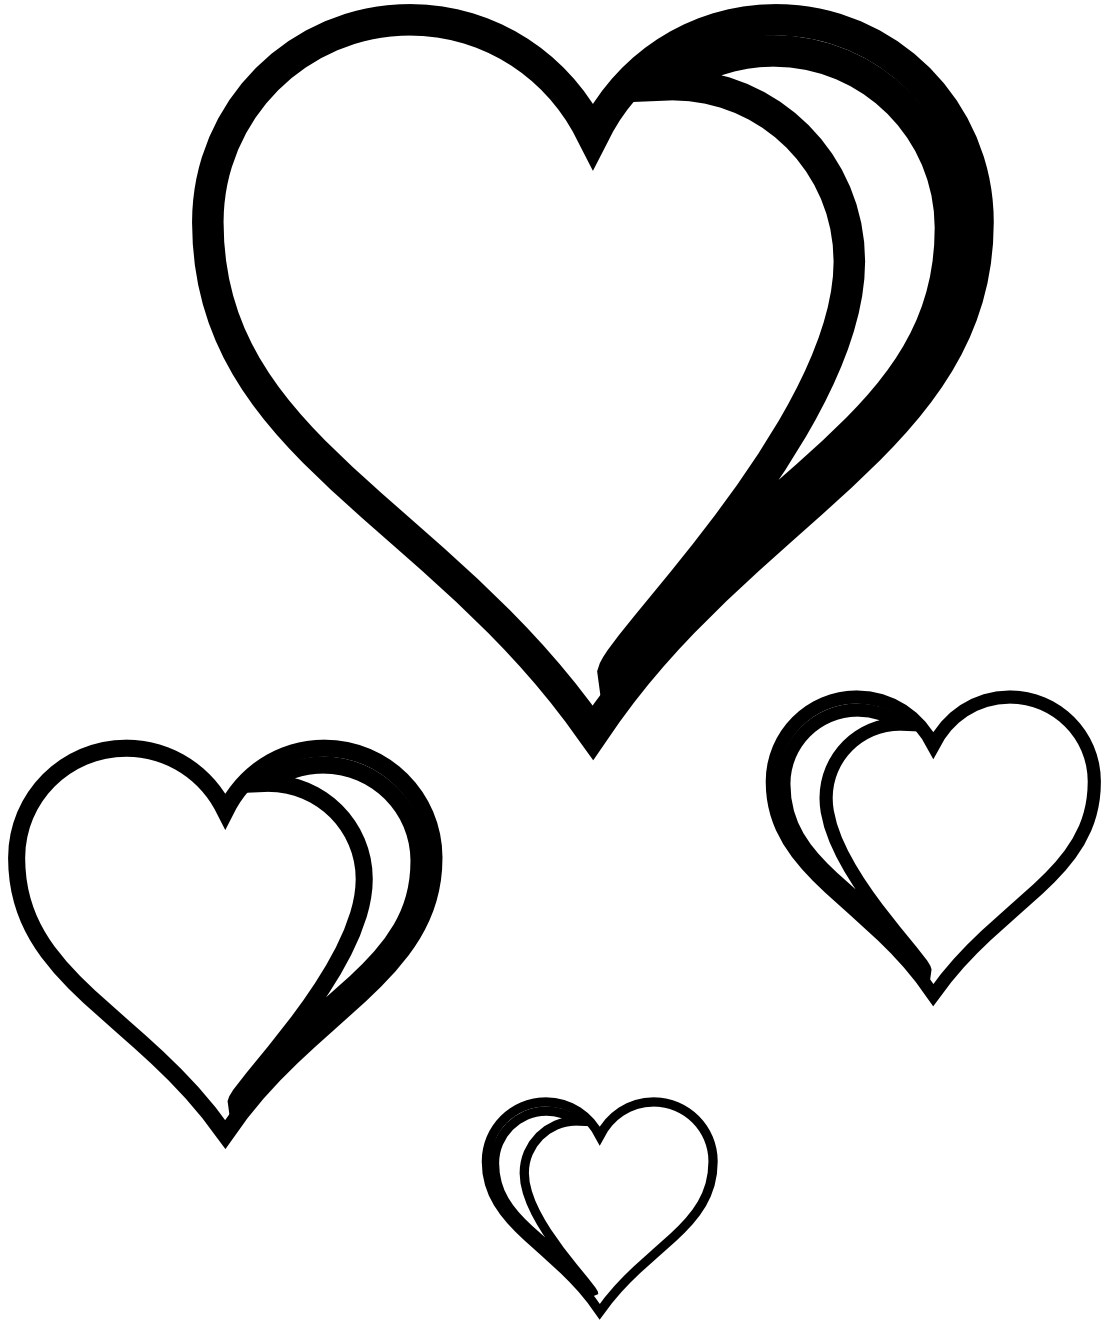 Real heart clipart black and white clipartxtras